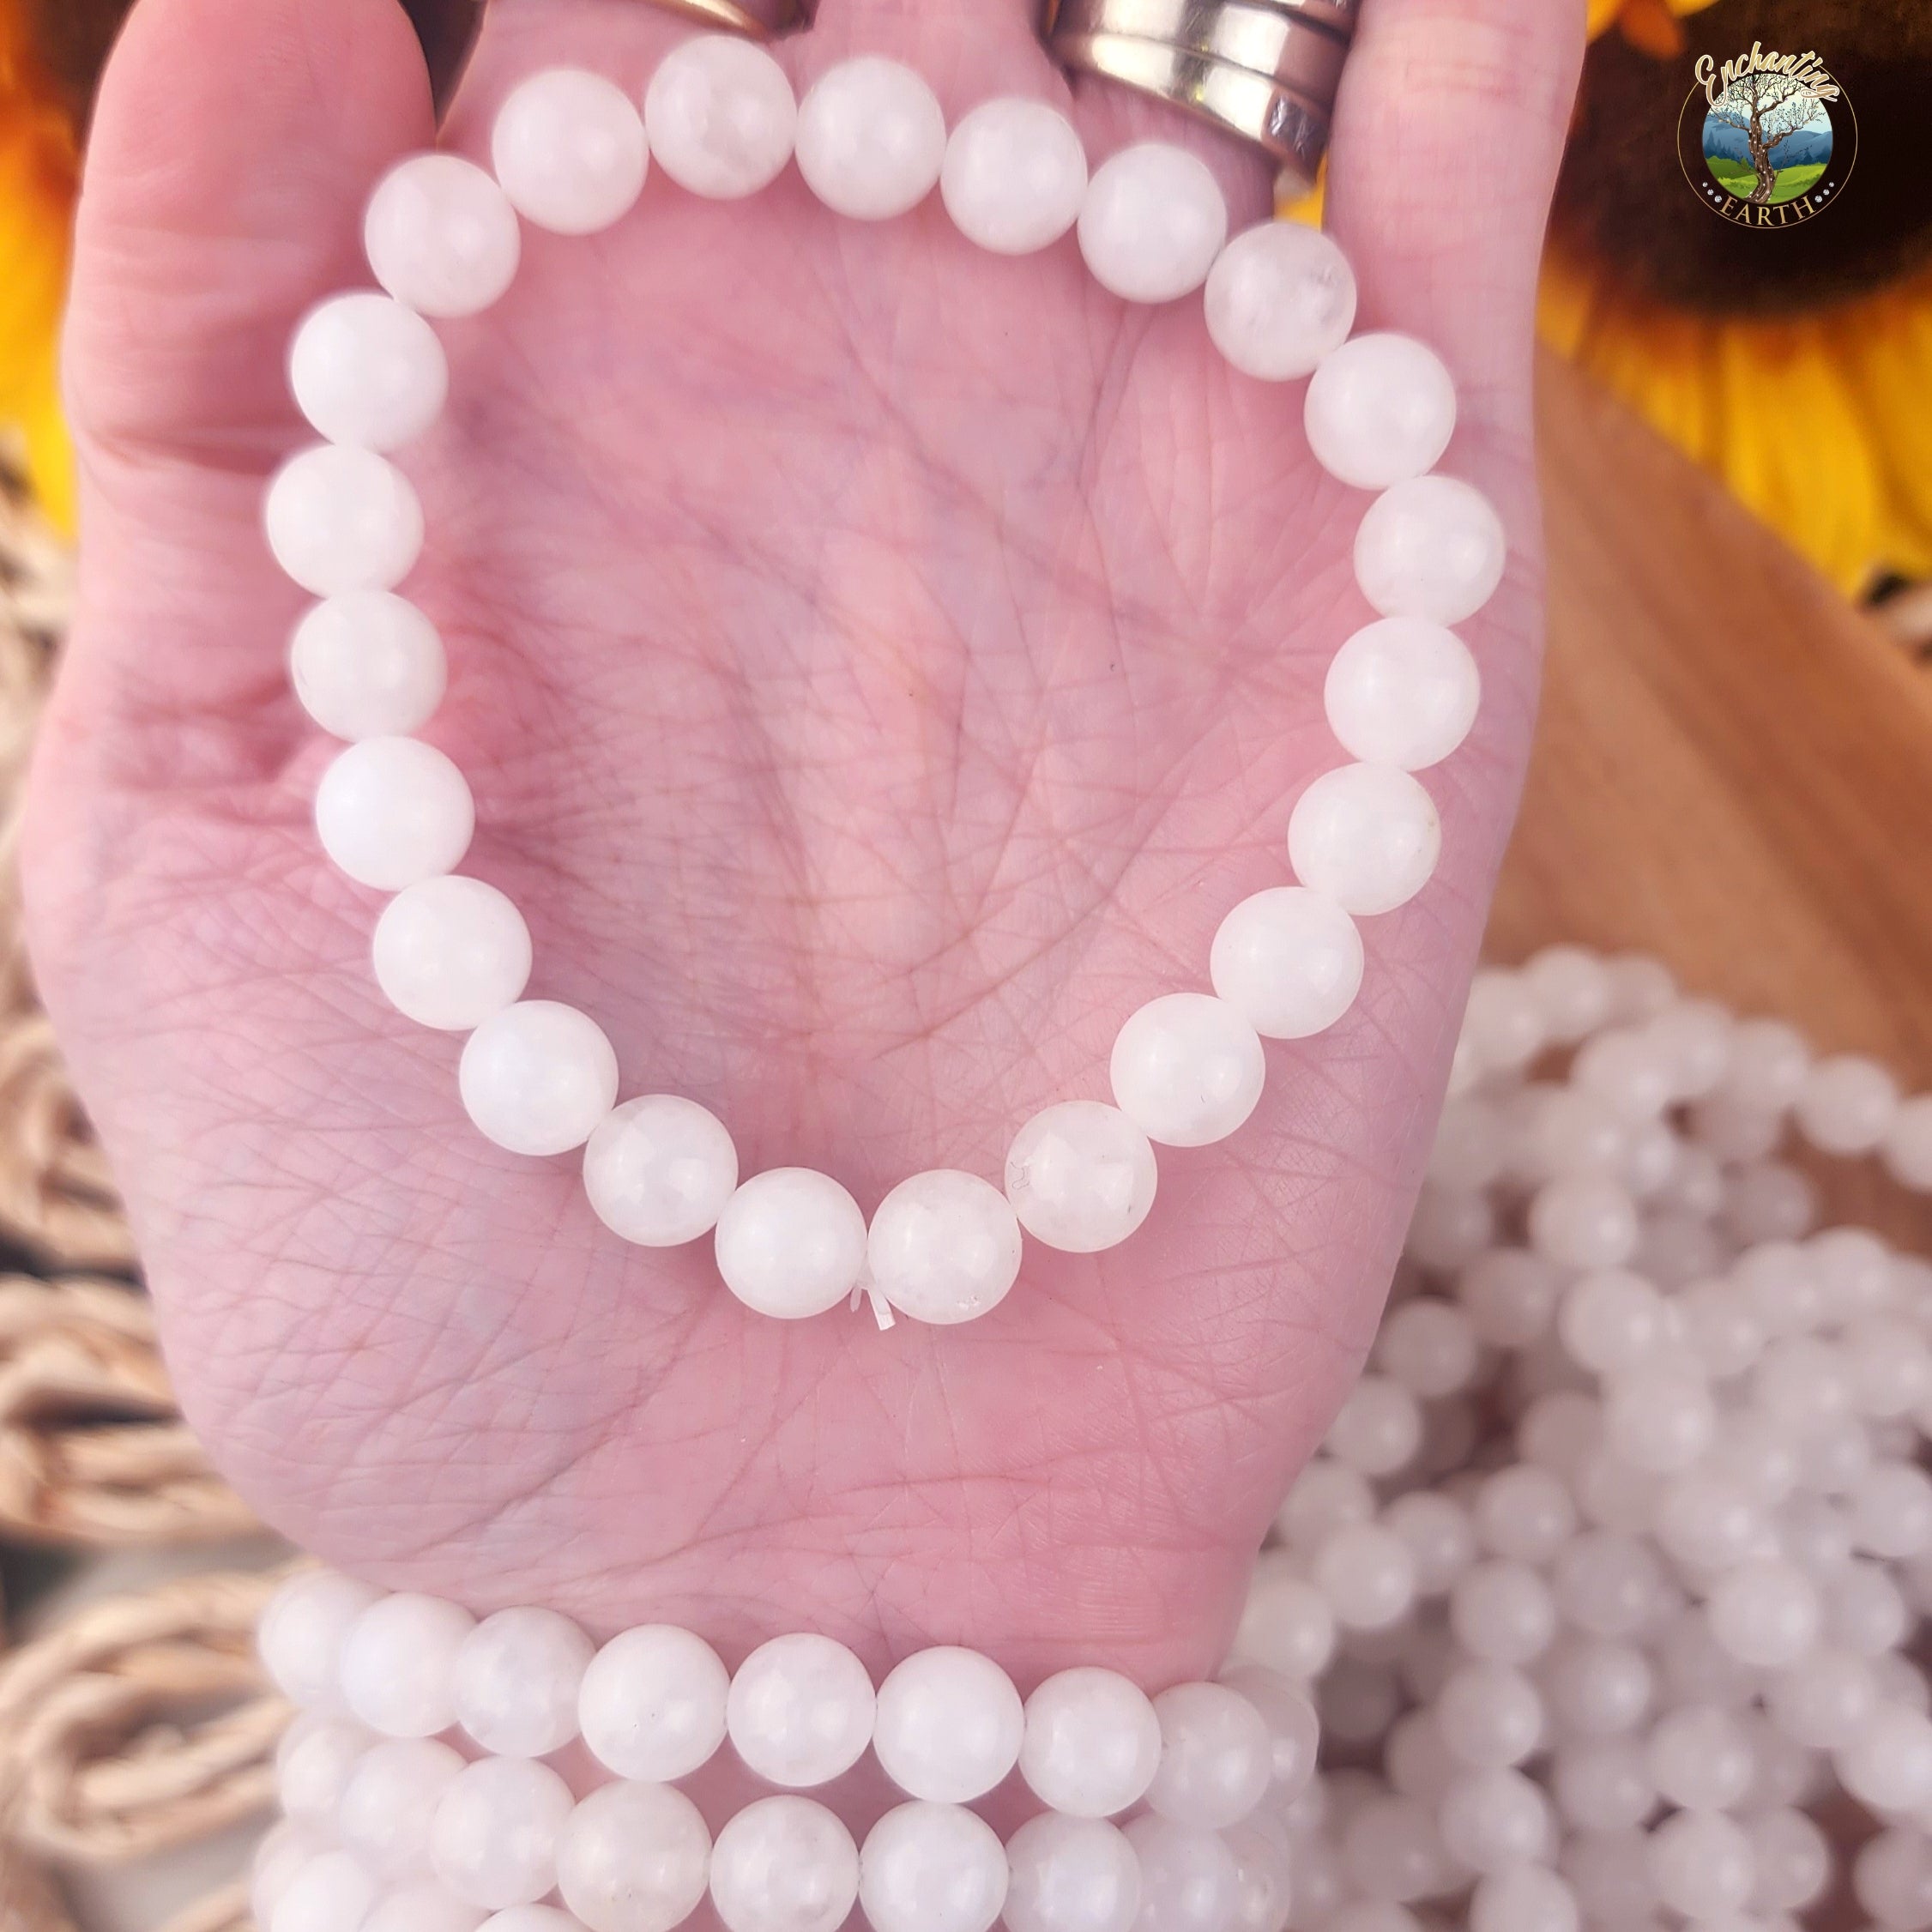 White Jade Bracelet for Emotional Healing, Love and Peace